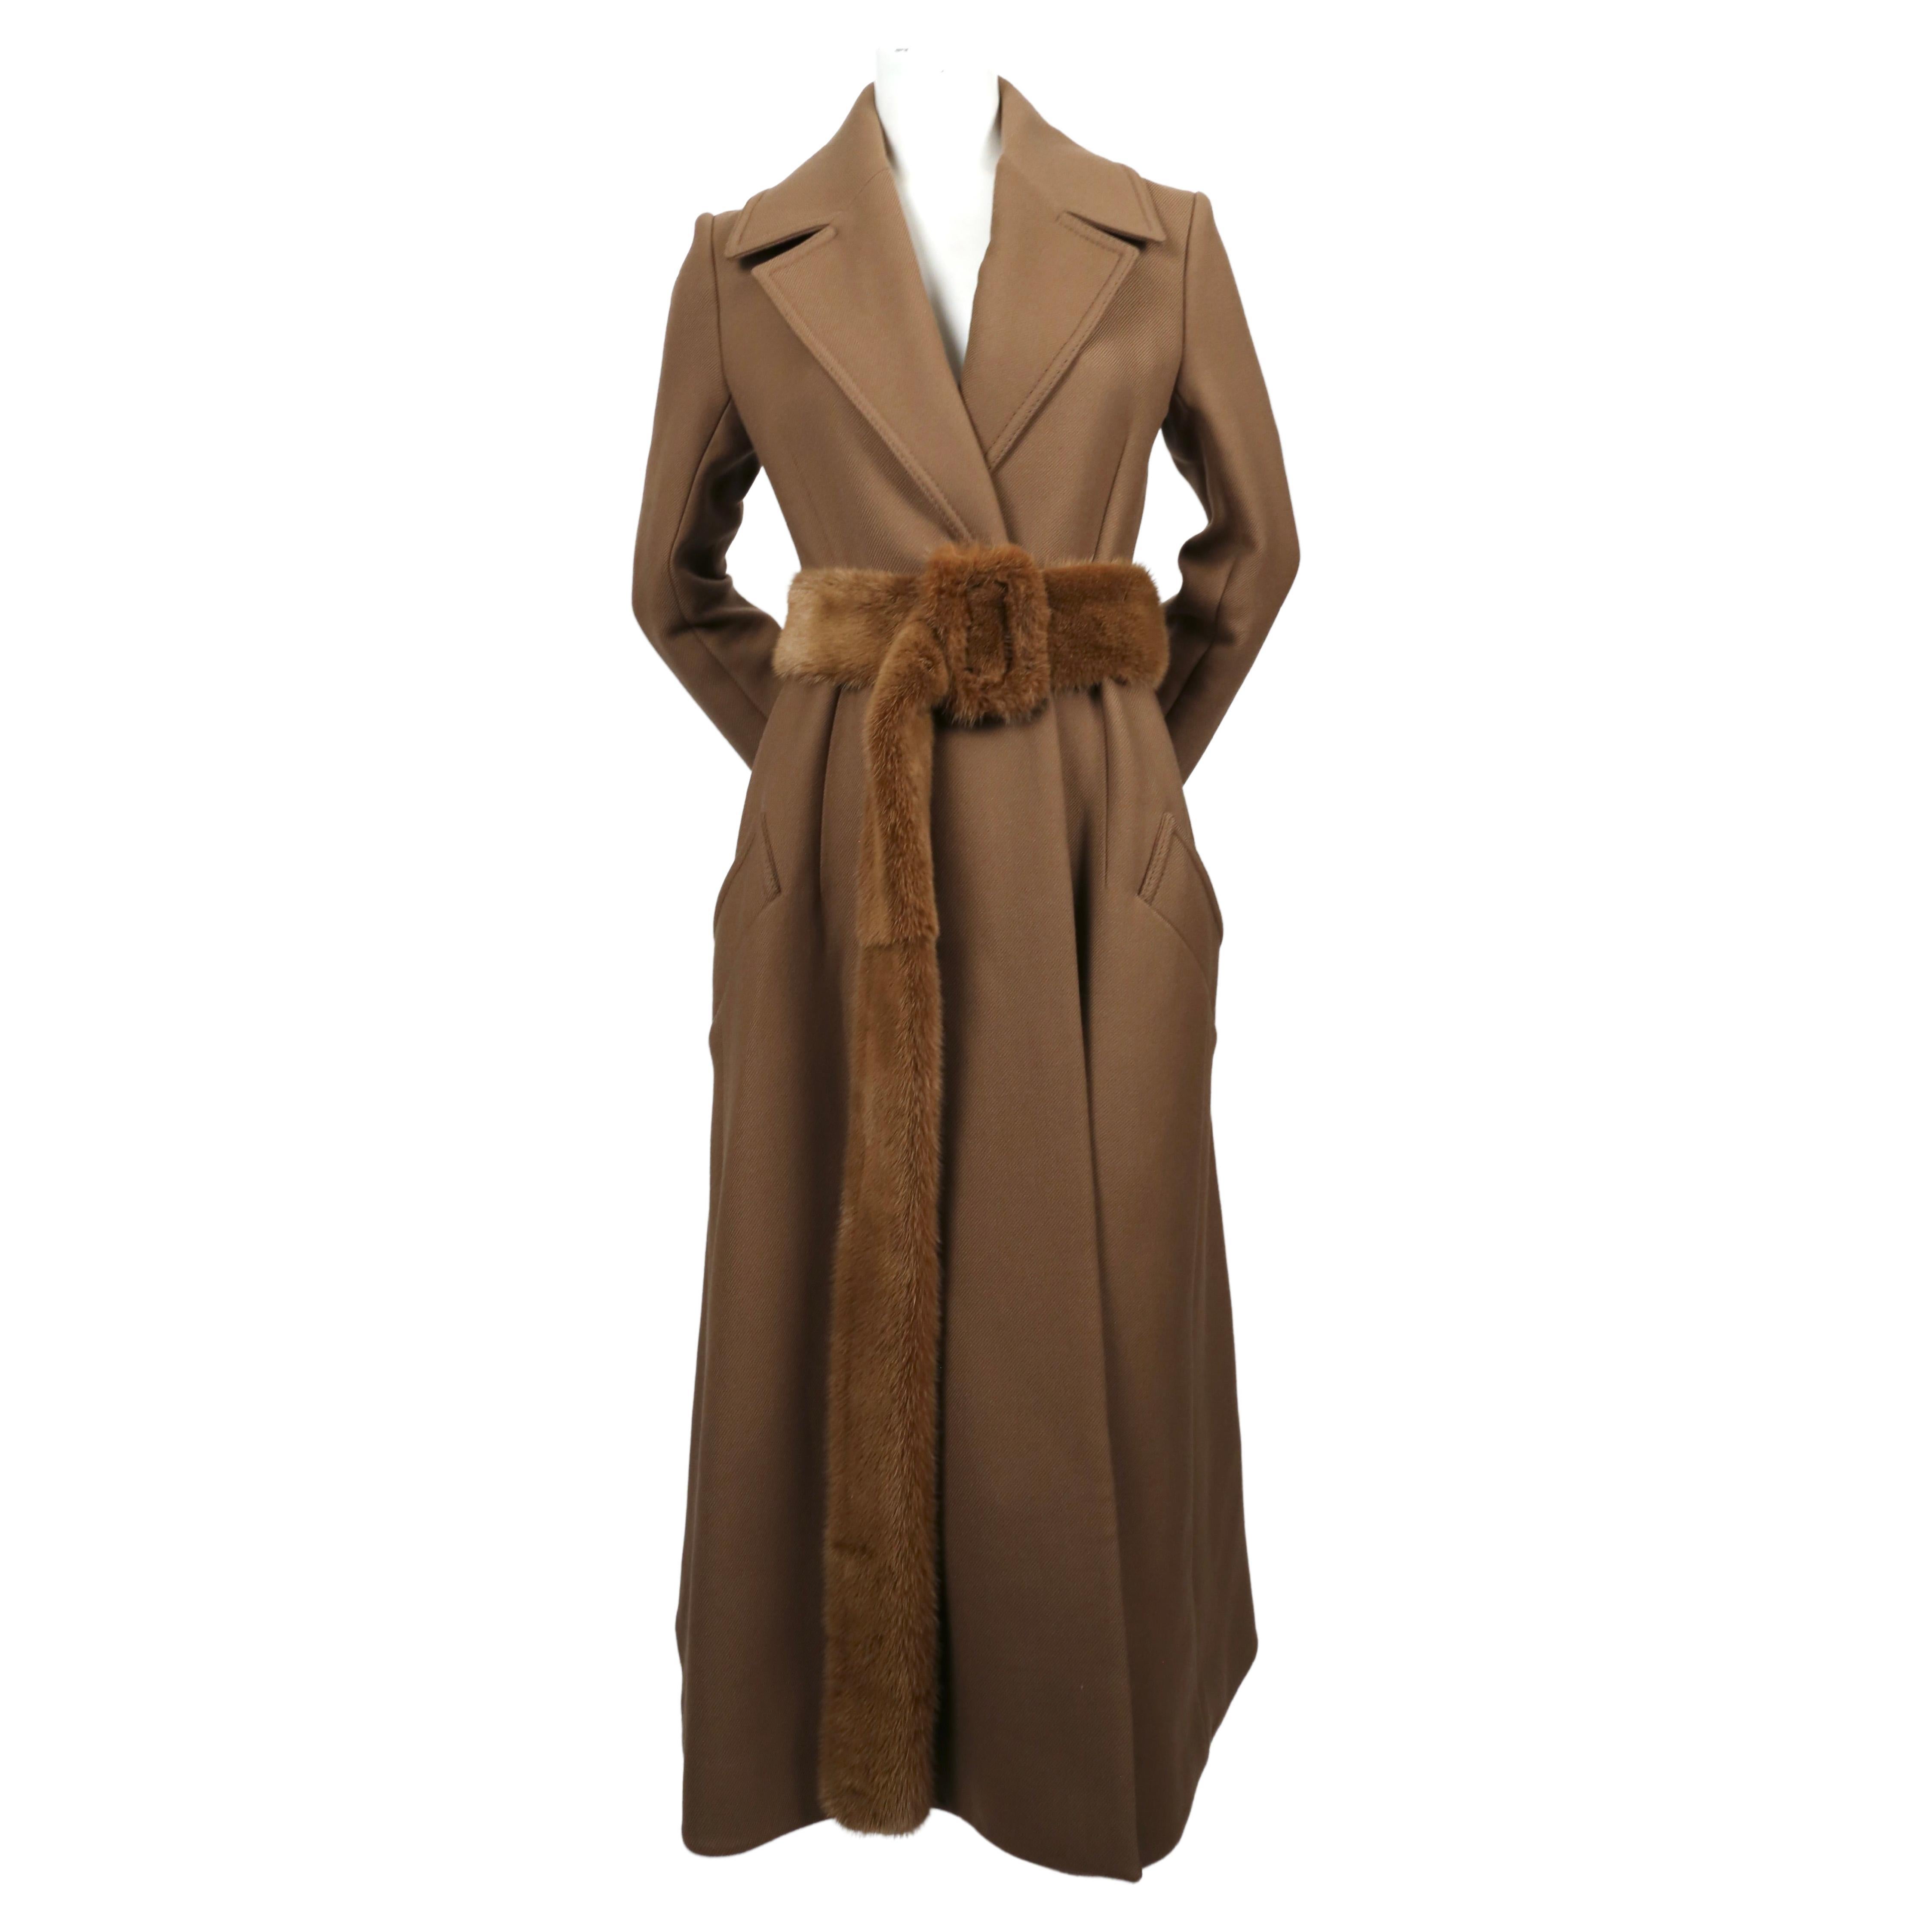 Camel wool gabardine coat with narrow arms and flared hemline with matching extra long mink belt designed by Phoebe Philo for Celine exactly as seen on the fall 2014 runway. French size 38 which best fits a US 2-6. Approximate measurements: shoulder